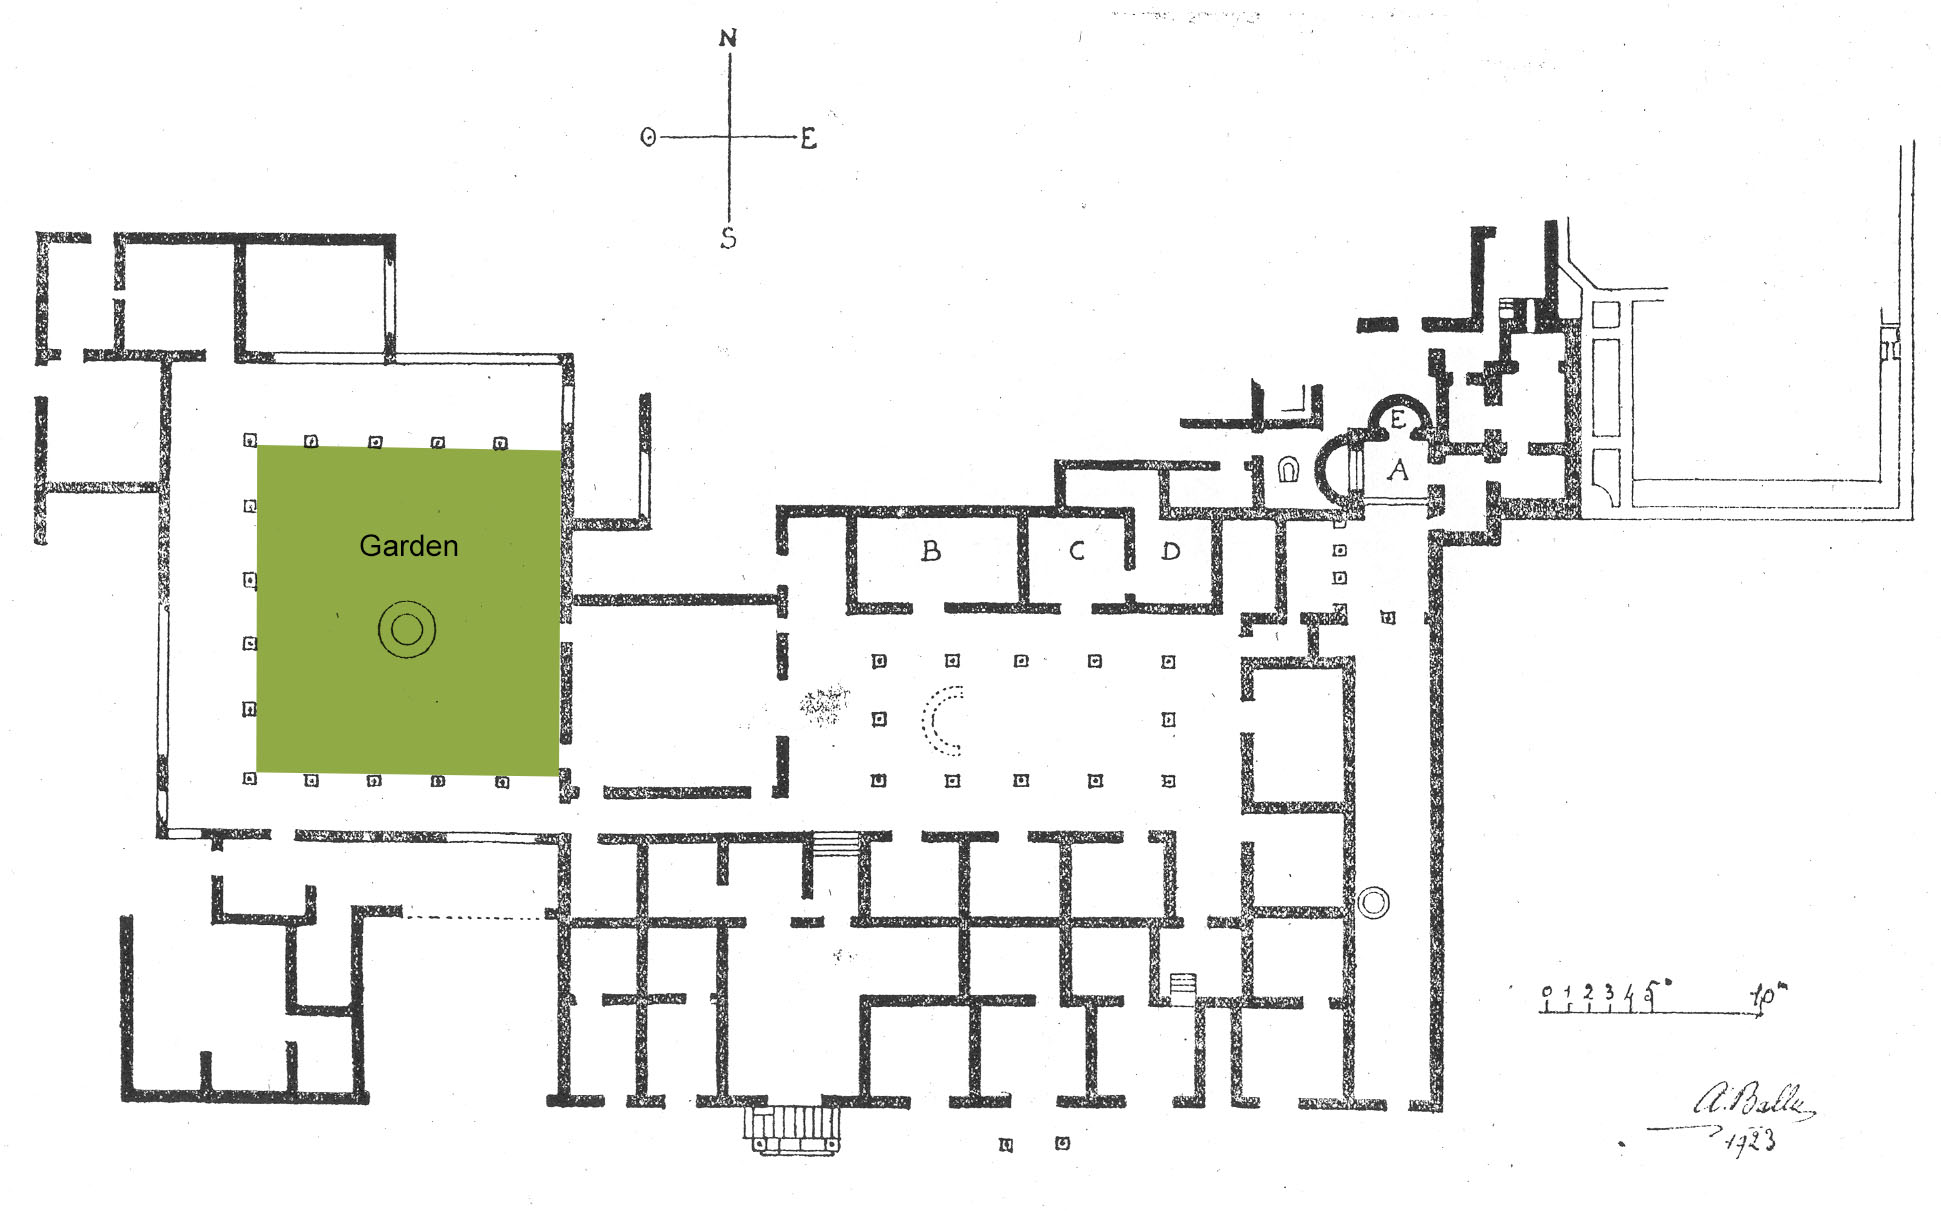 Plan of the House at the west of the filadelfes Baths at Thamugadi; Les mosaïques de Timgad, p. 81, fig. 10